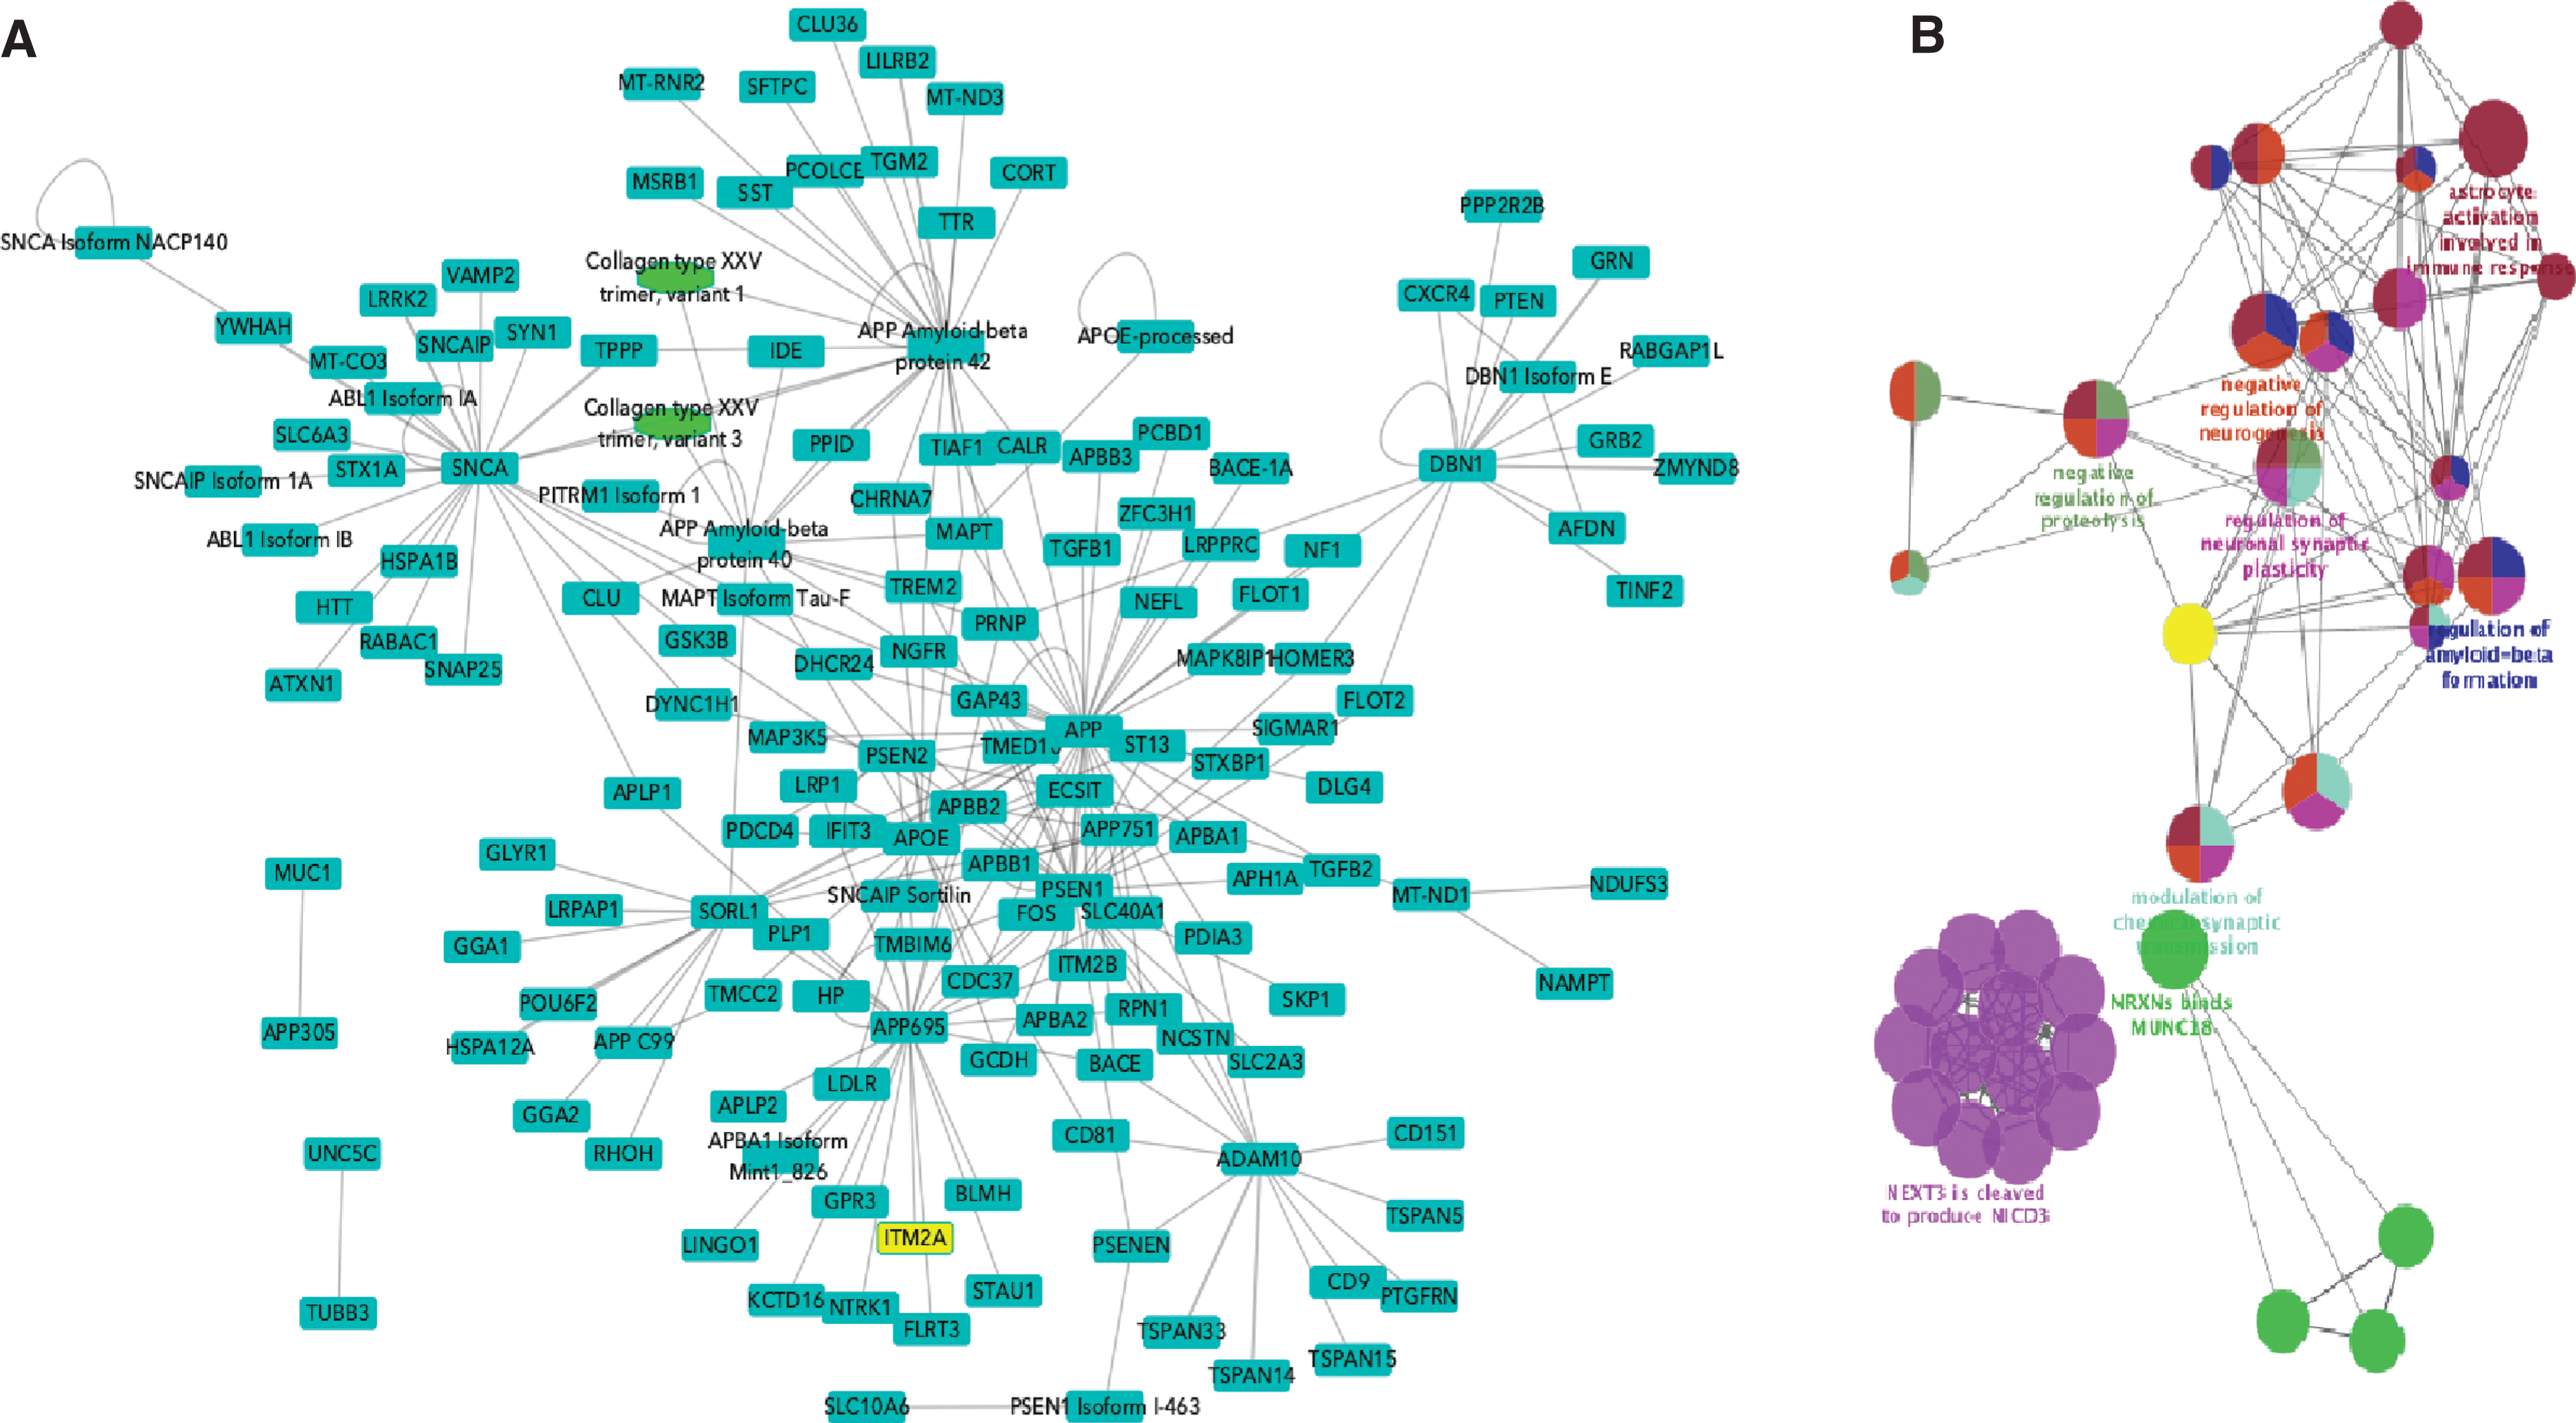 Networks built from Alzheimer’s disease relevant proteins. A) High-confidence network with isoforms and post-processed chains acting as distinct nodes. Seed proteins are those to which the Alzheimer Disease keyword has been added in UniProtKB. Blue squares represent proteins, green ovals represent protein complexes. Nodes have been collapsed to canonical sequence/gene level. B) ClueGO functional enrichment analysis of network shown in B.